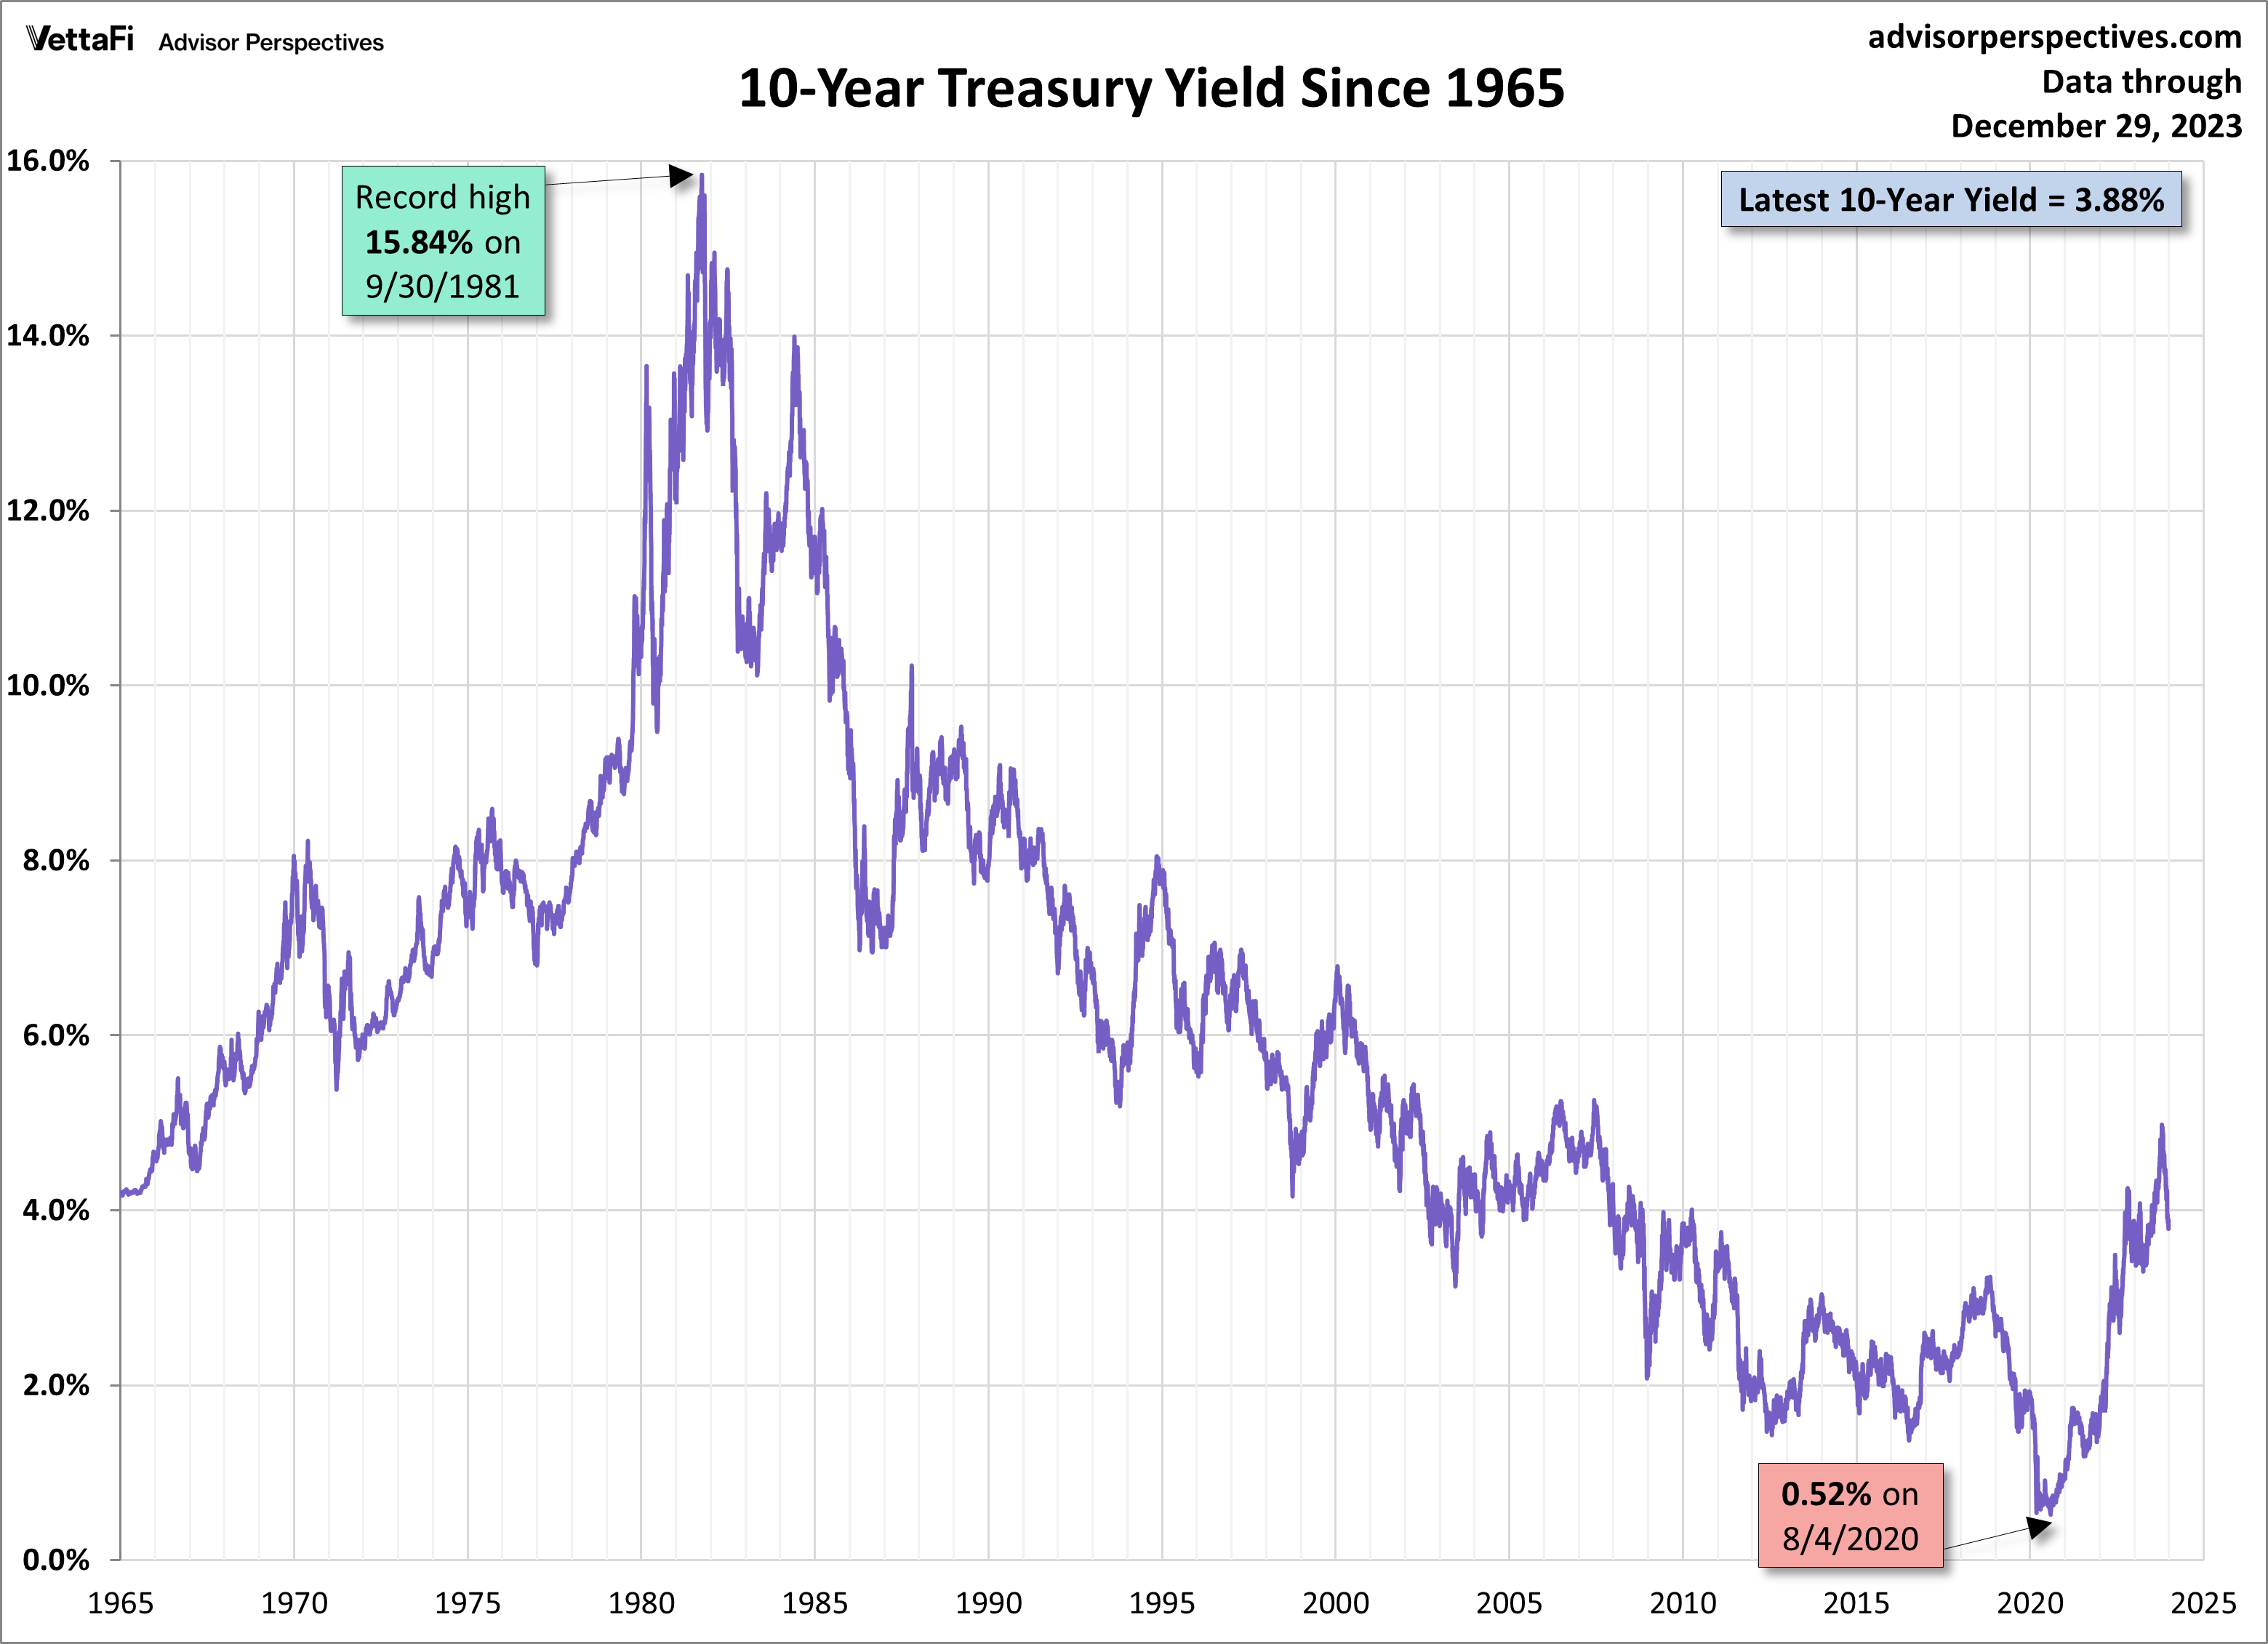 10-Year Yields Since 1965 Log Scale